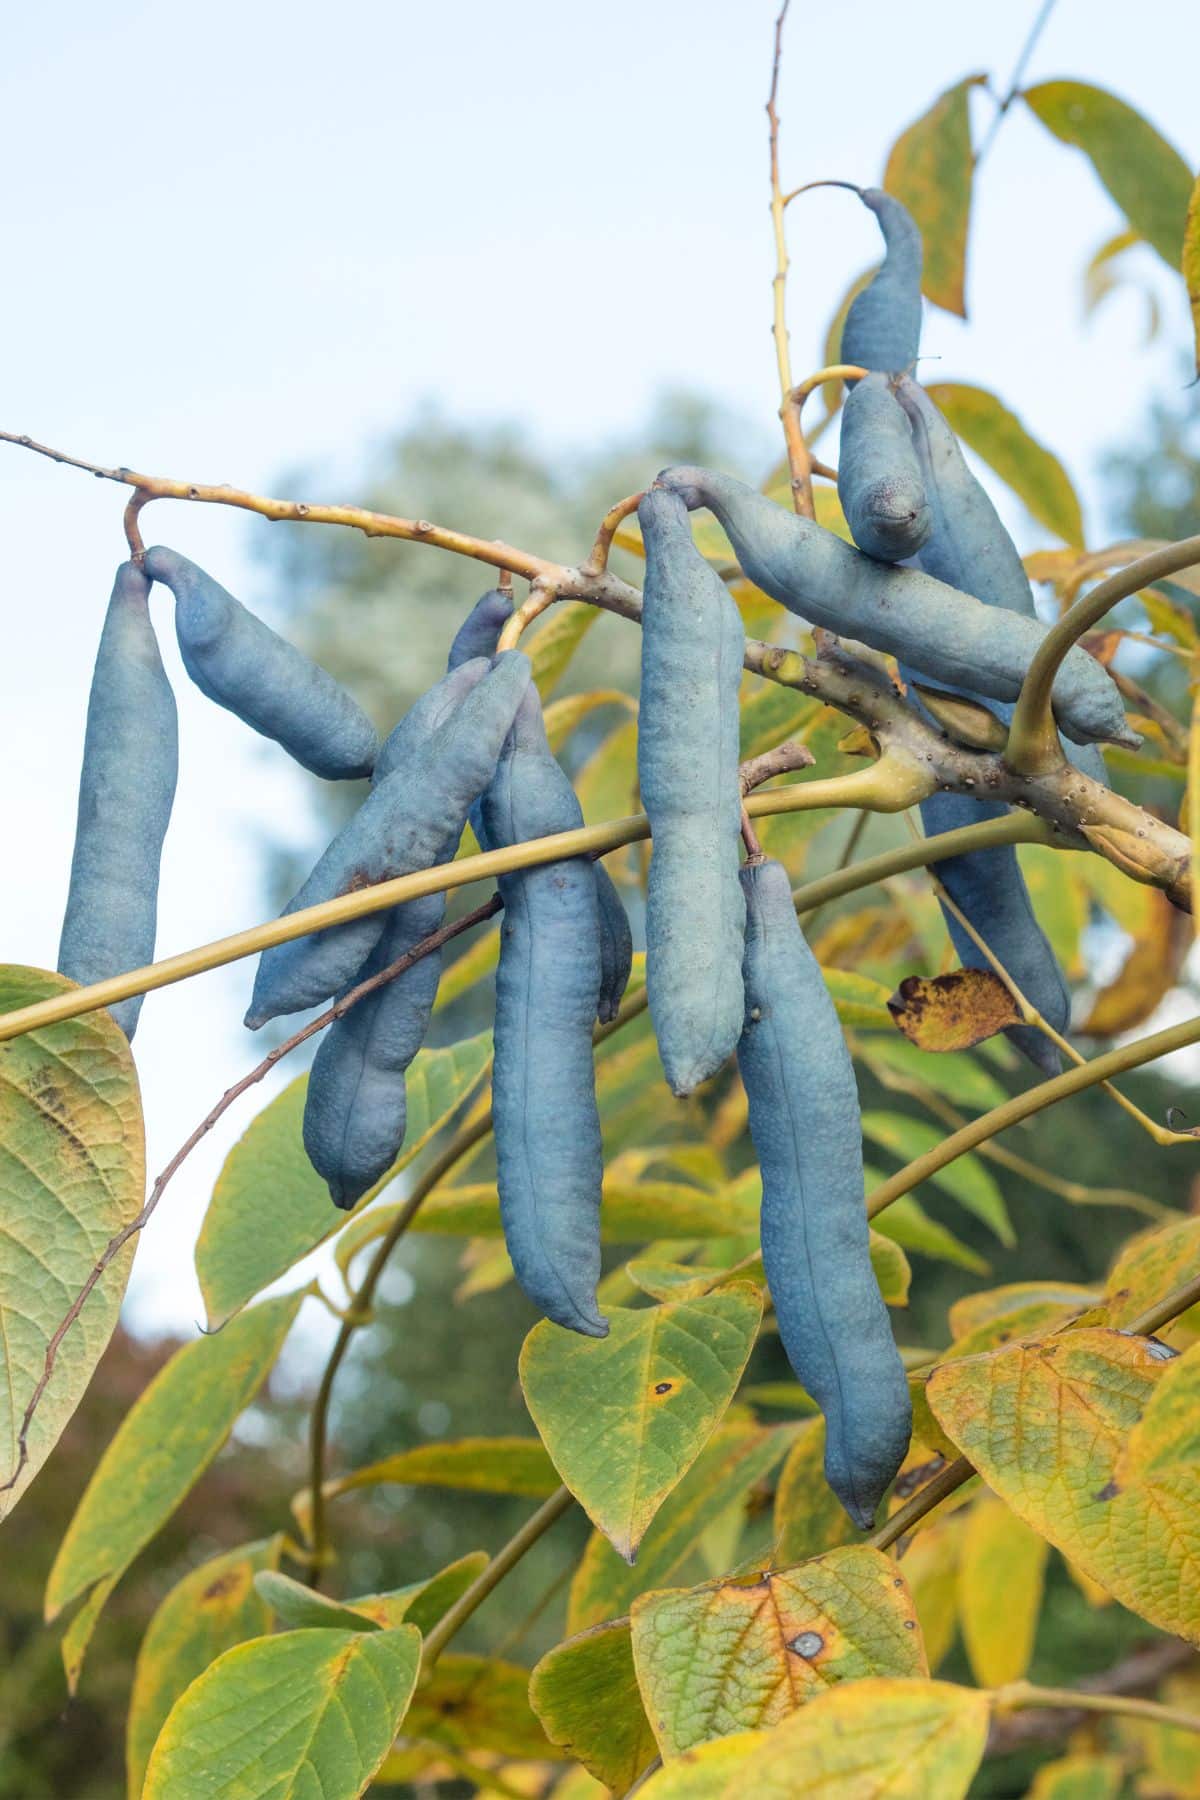 blue sausage fruits hanging on a tree.